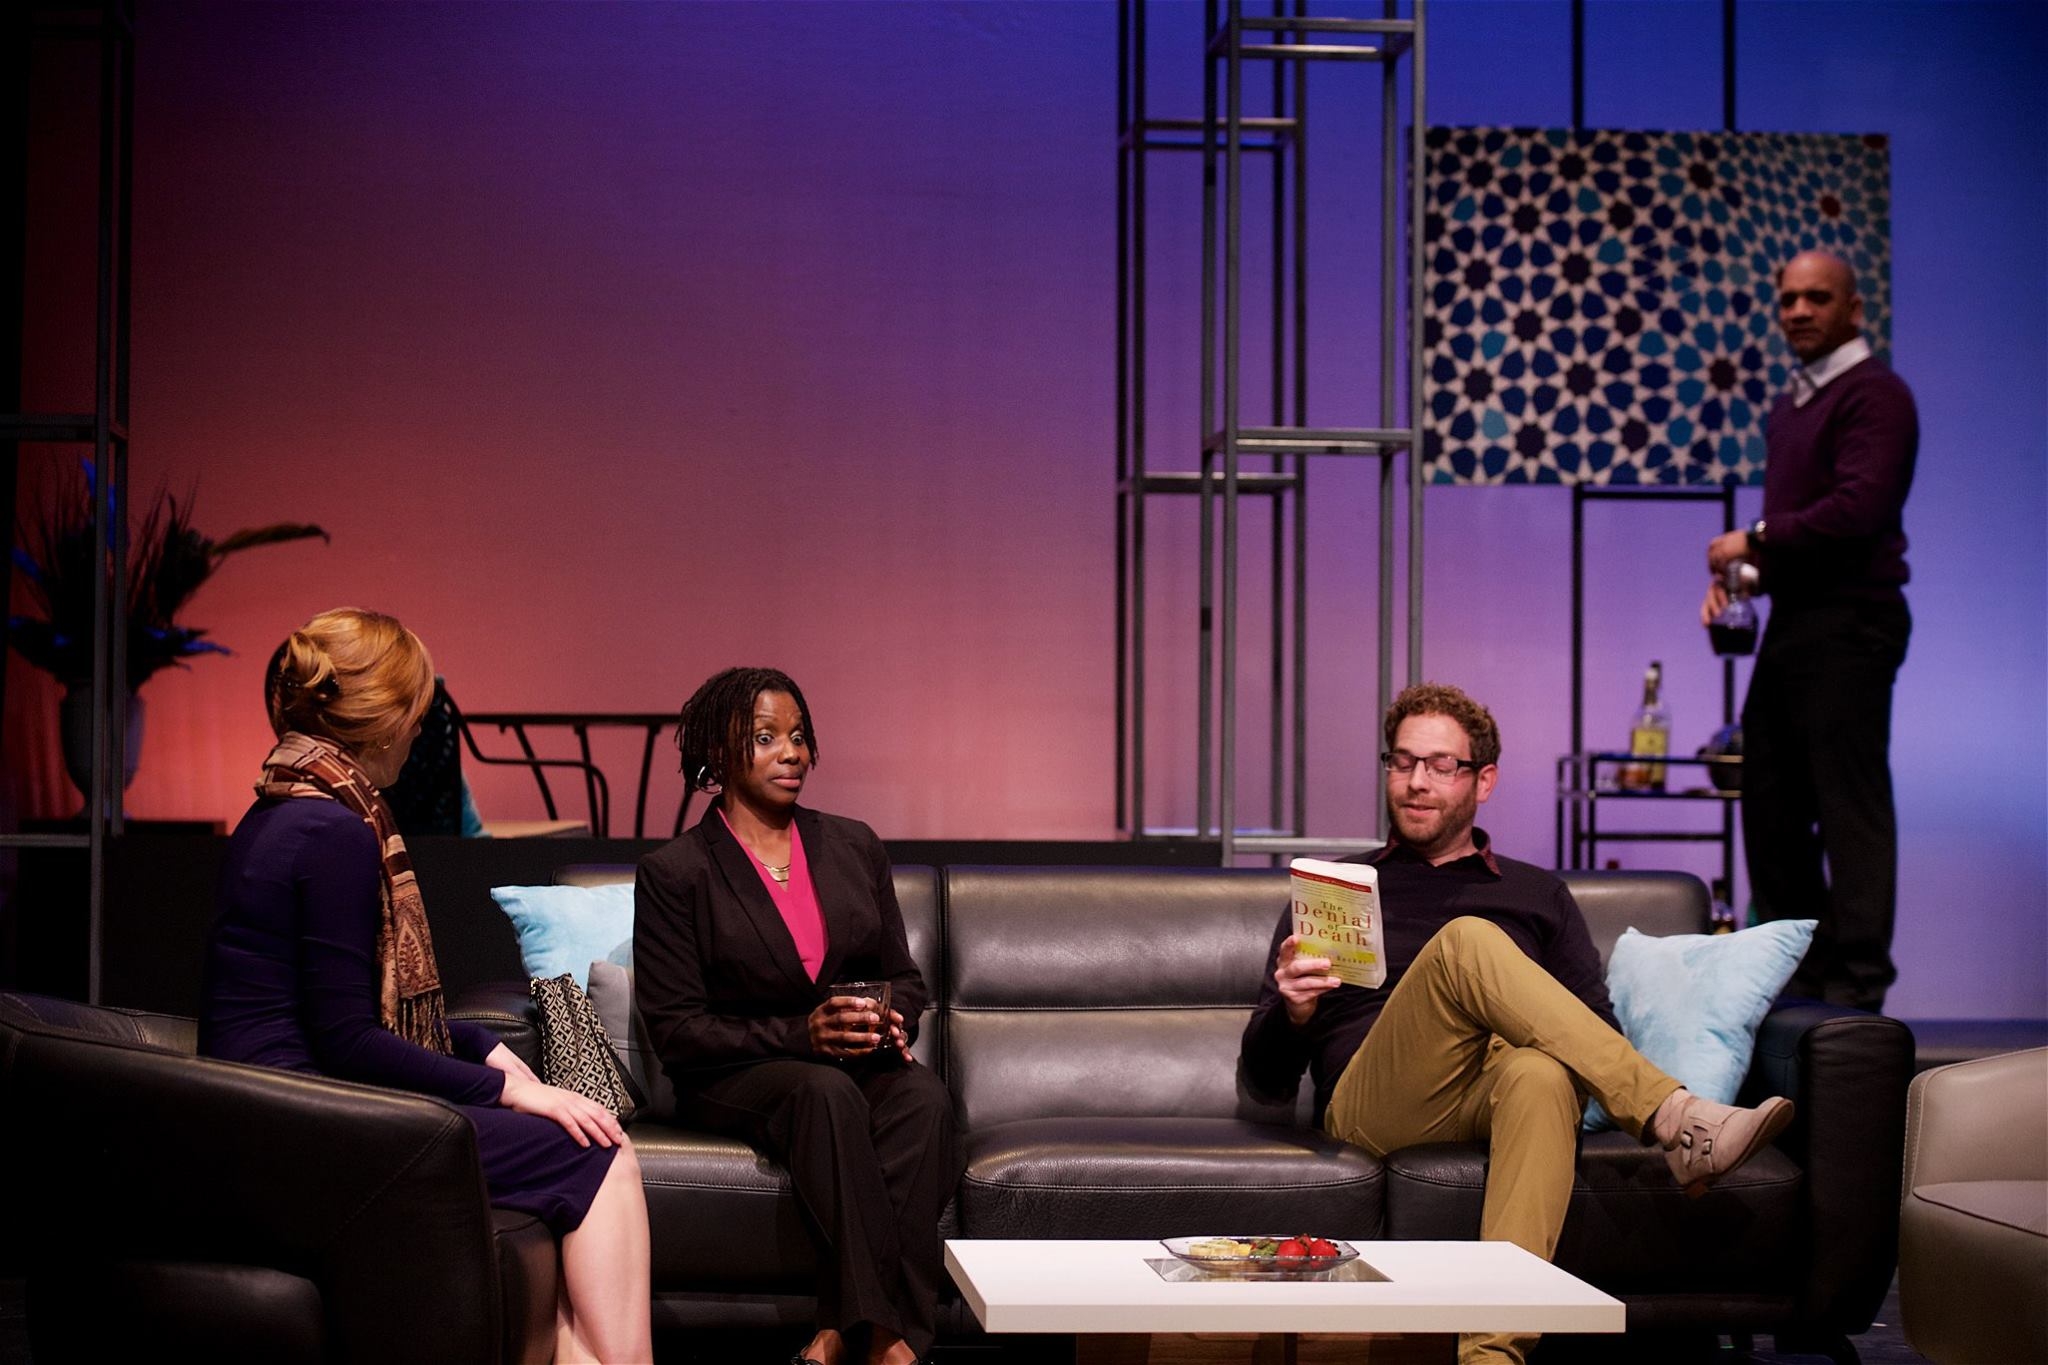 Review: ‘Disgraced’ expands horizons with authentic emotion